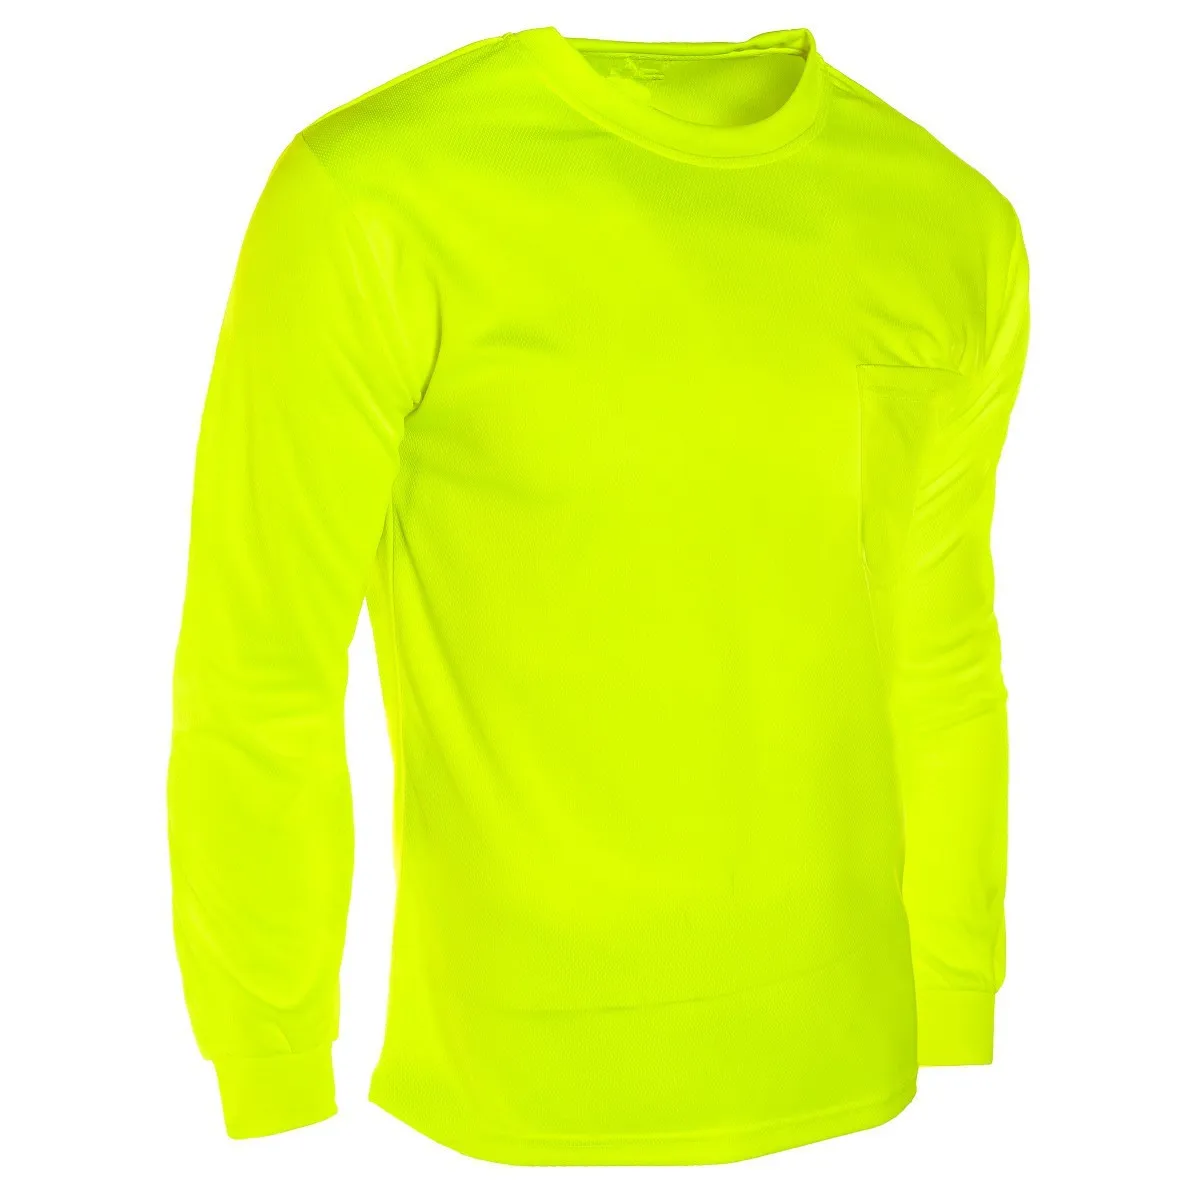 Wholesale Microfiber Long Sleeve T-shirt,Neon Green And Orange Safety ...